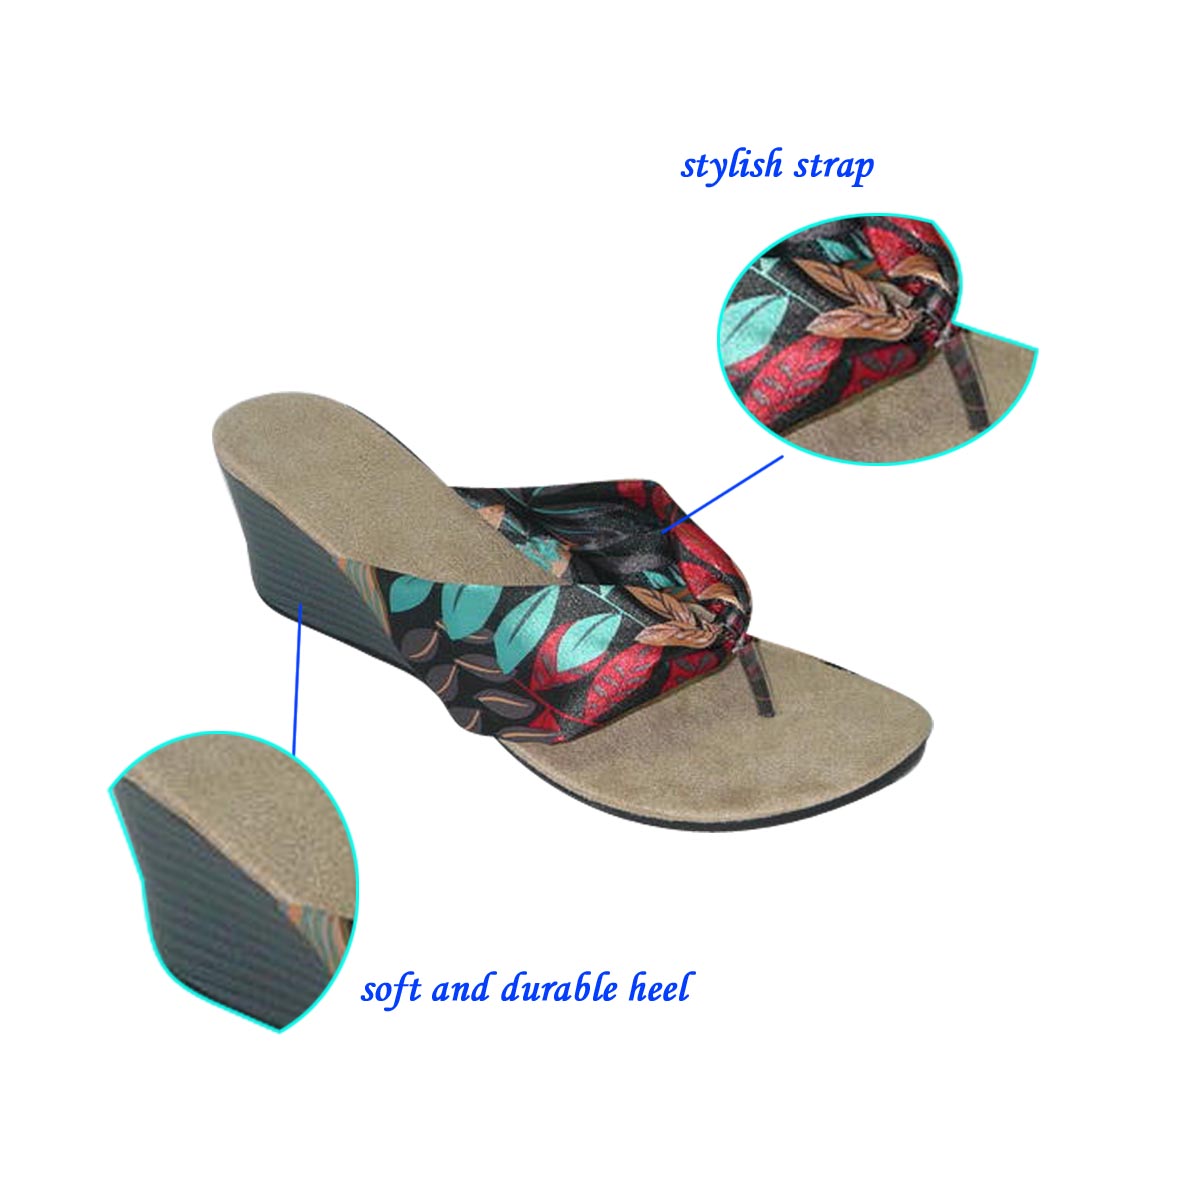 Newest Woman's Wedge Sandals/Flip flop with Durable and Soft Heel 2017 from Chinese Factory